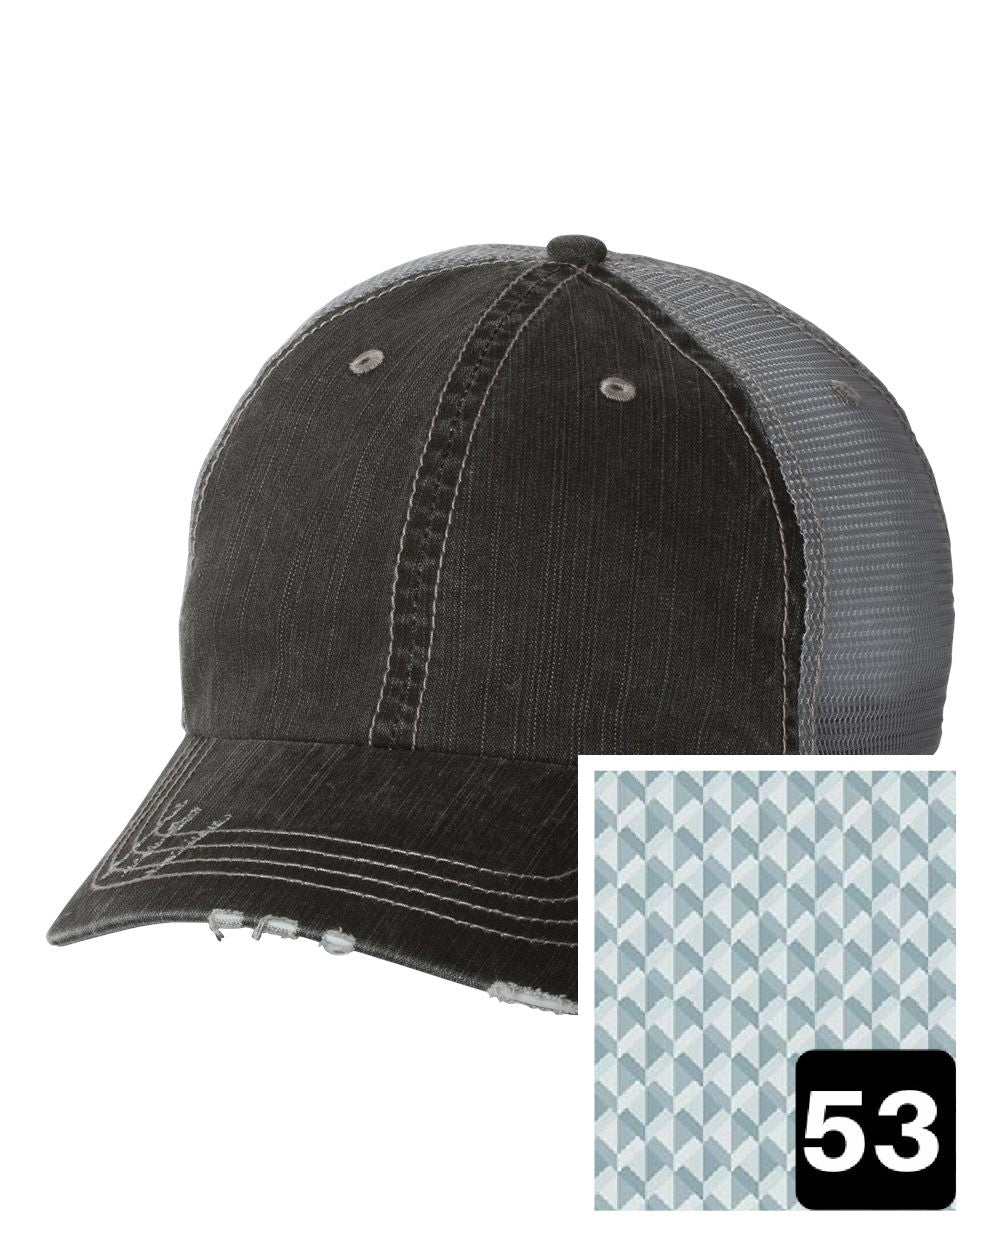 gray distressed trucker hat with multi-color stripe fabric state of Oklahoma